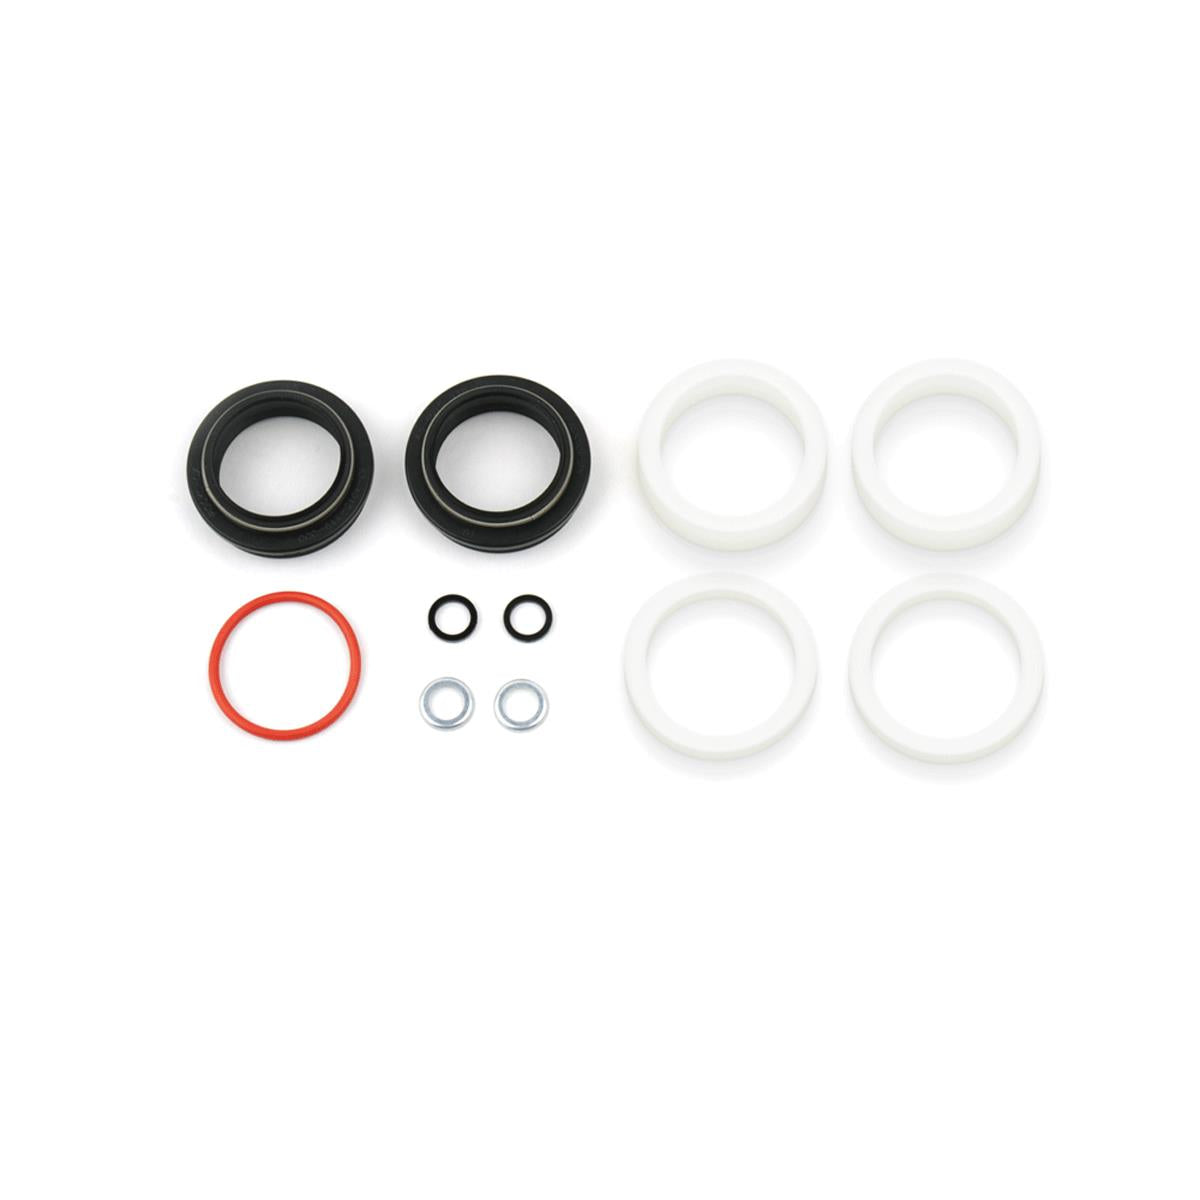 Rockshox Spare -  Fork Dust Wiper Upgrade Kit - 30Mm Black Flanged Low Friction Seals (Includes Dust Wipers, 5Mm & 10Mm Foam Rings) - Xc30/30Gold/30Silver/Paragon/Psylo/Duke